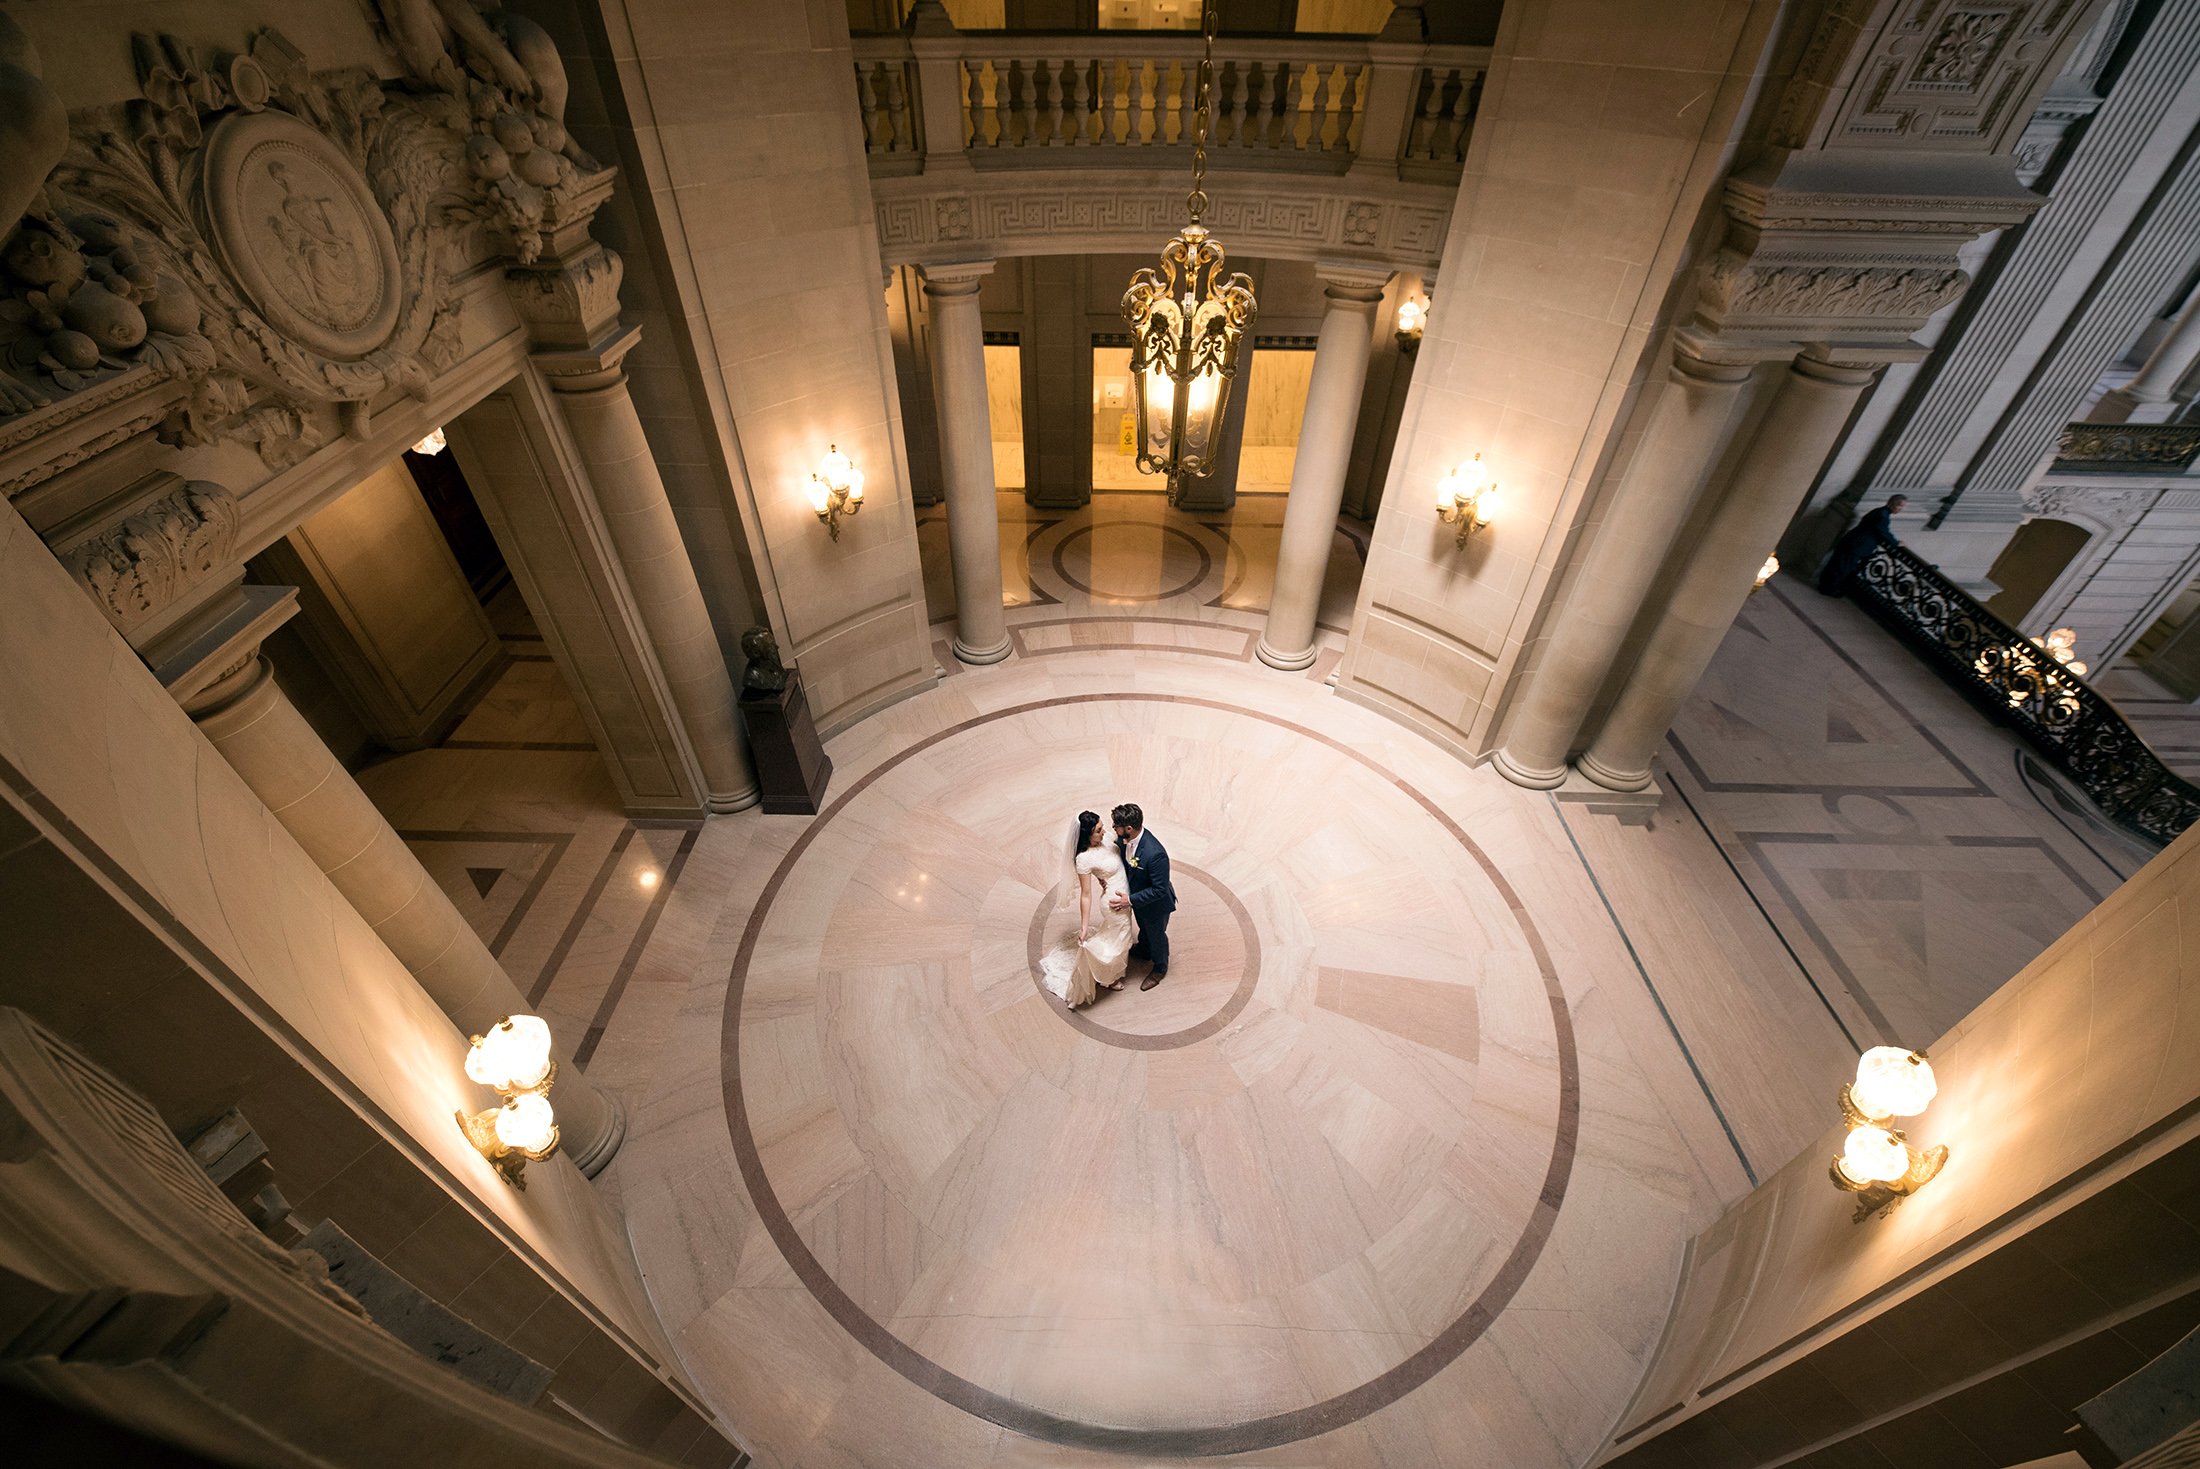  Bride and Groom dance in the rotunda at San Francisco City Hall on their wedding day. 